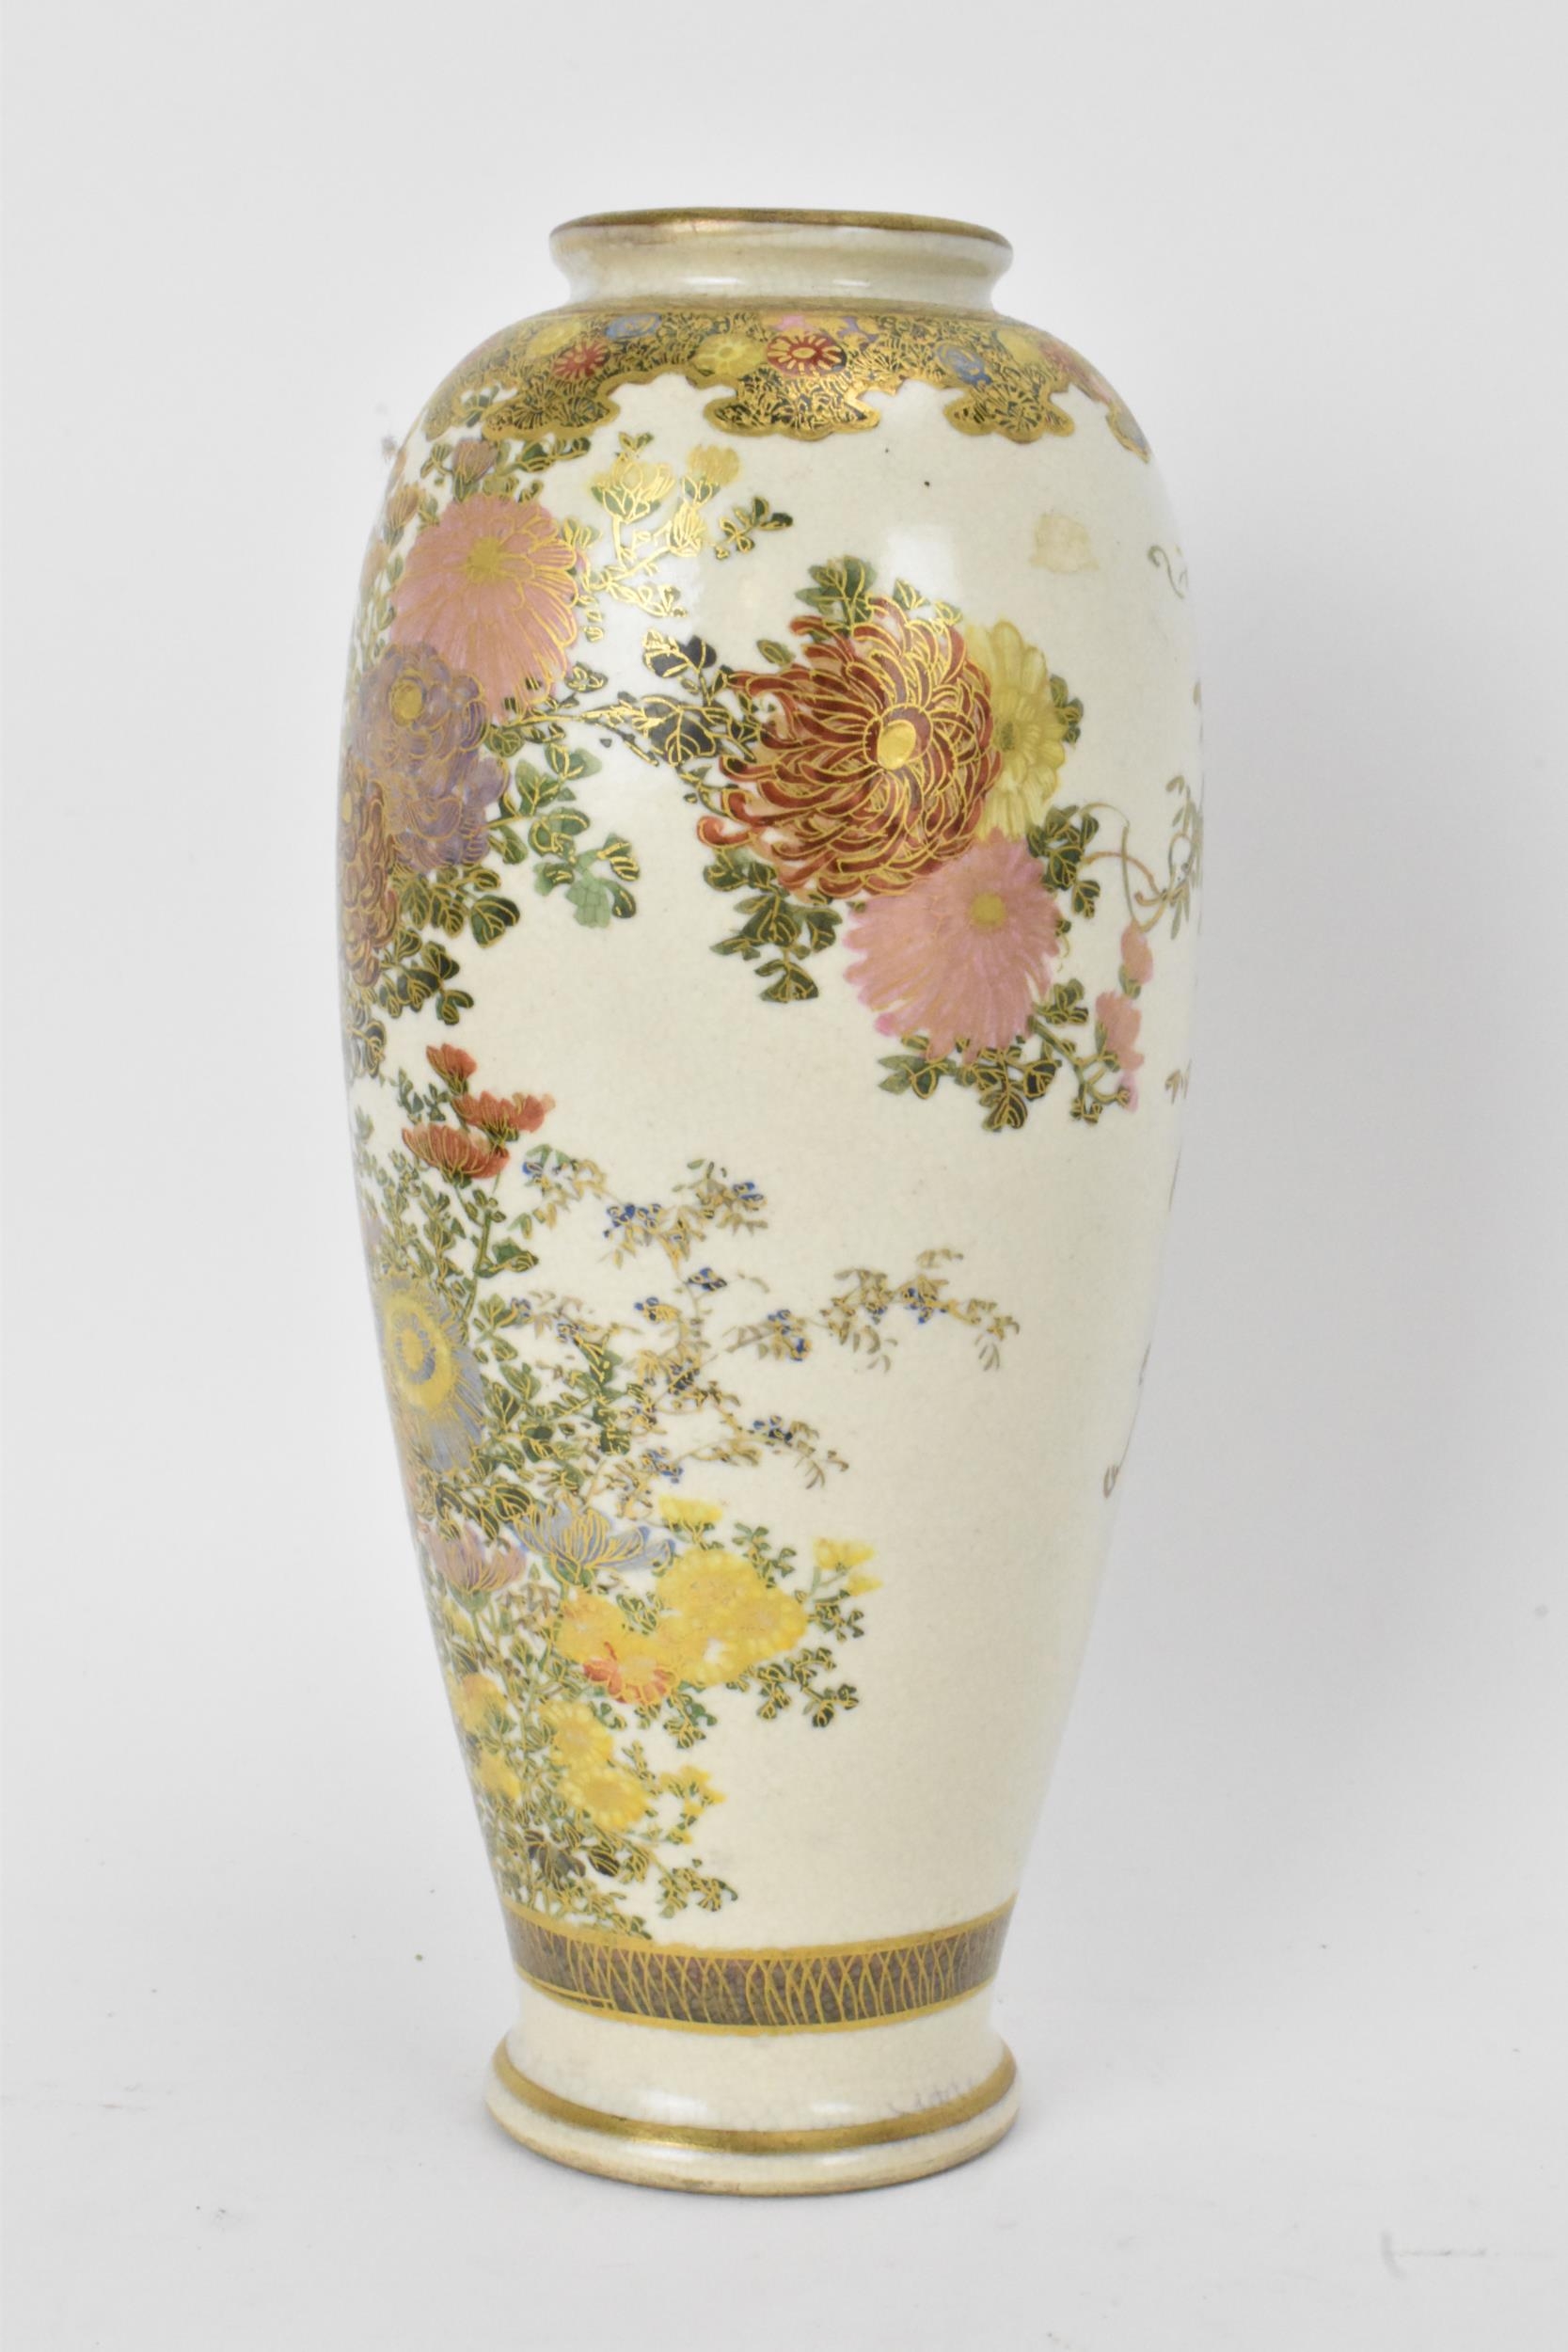 A Japanese Meiji period satsuma vase, of ovoid shape with flared rim, decorated with floral sprays - Image 2 of 6